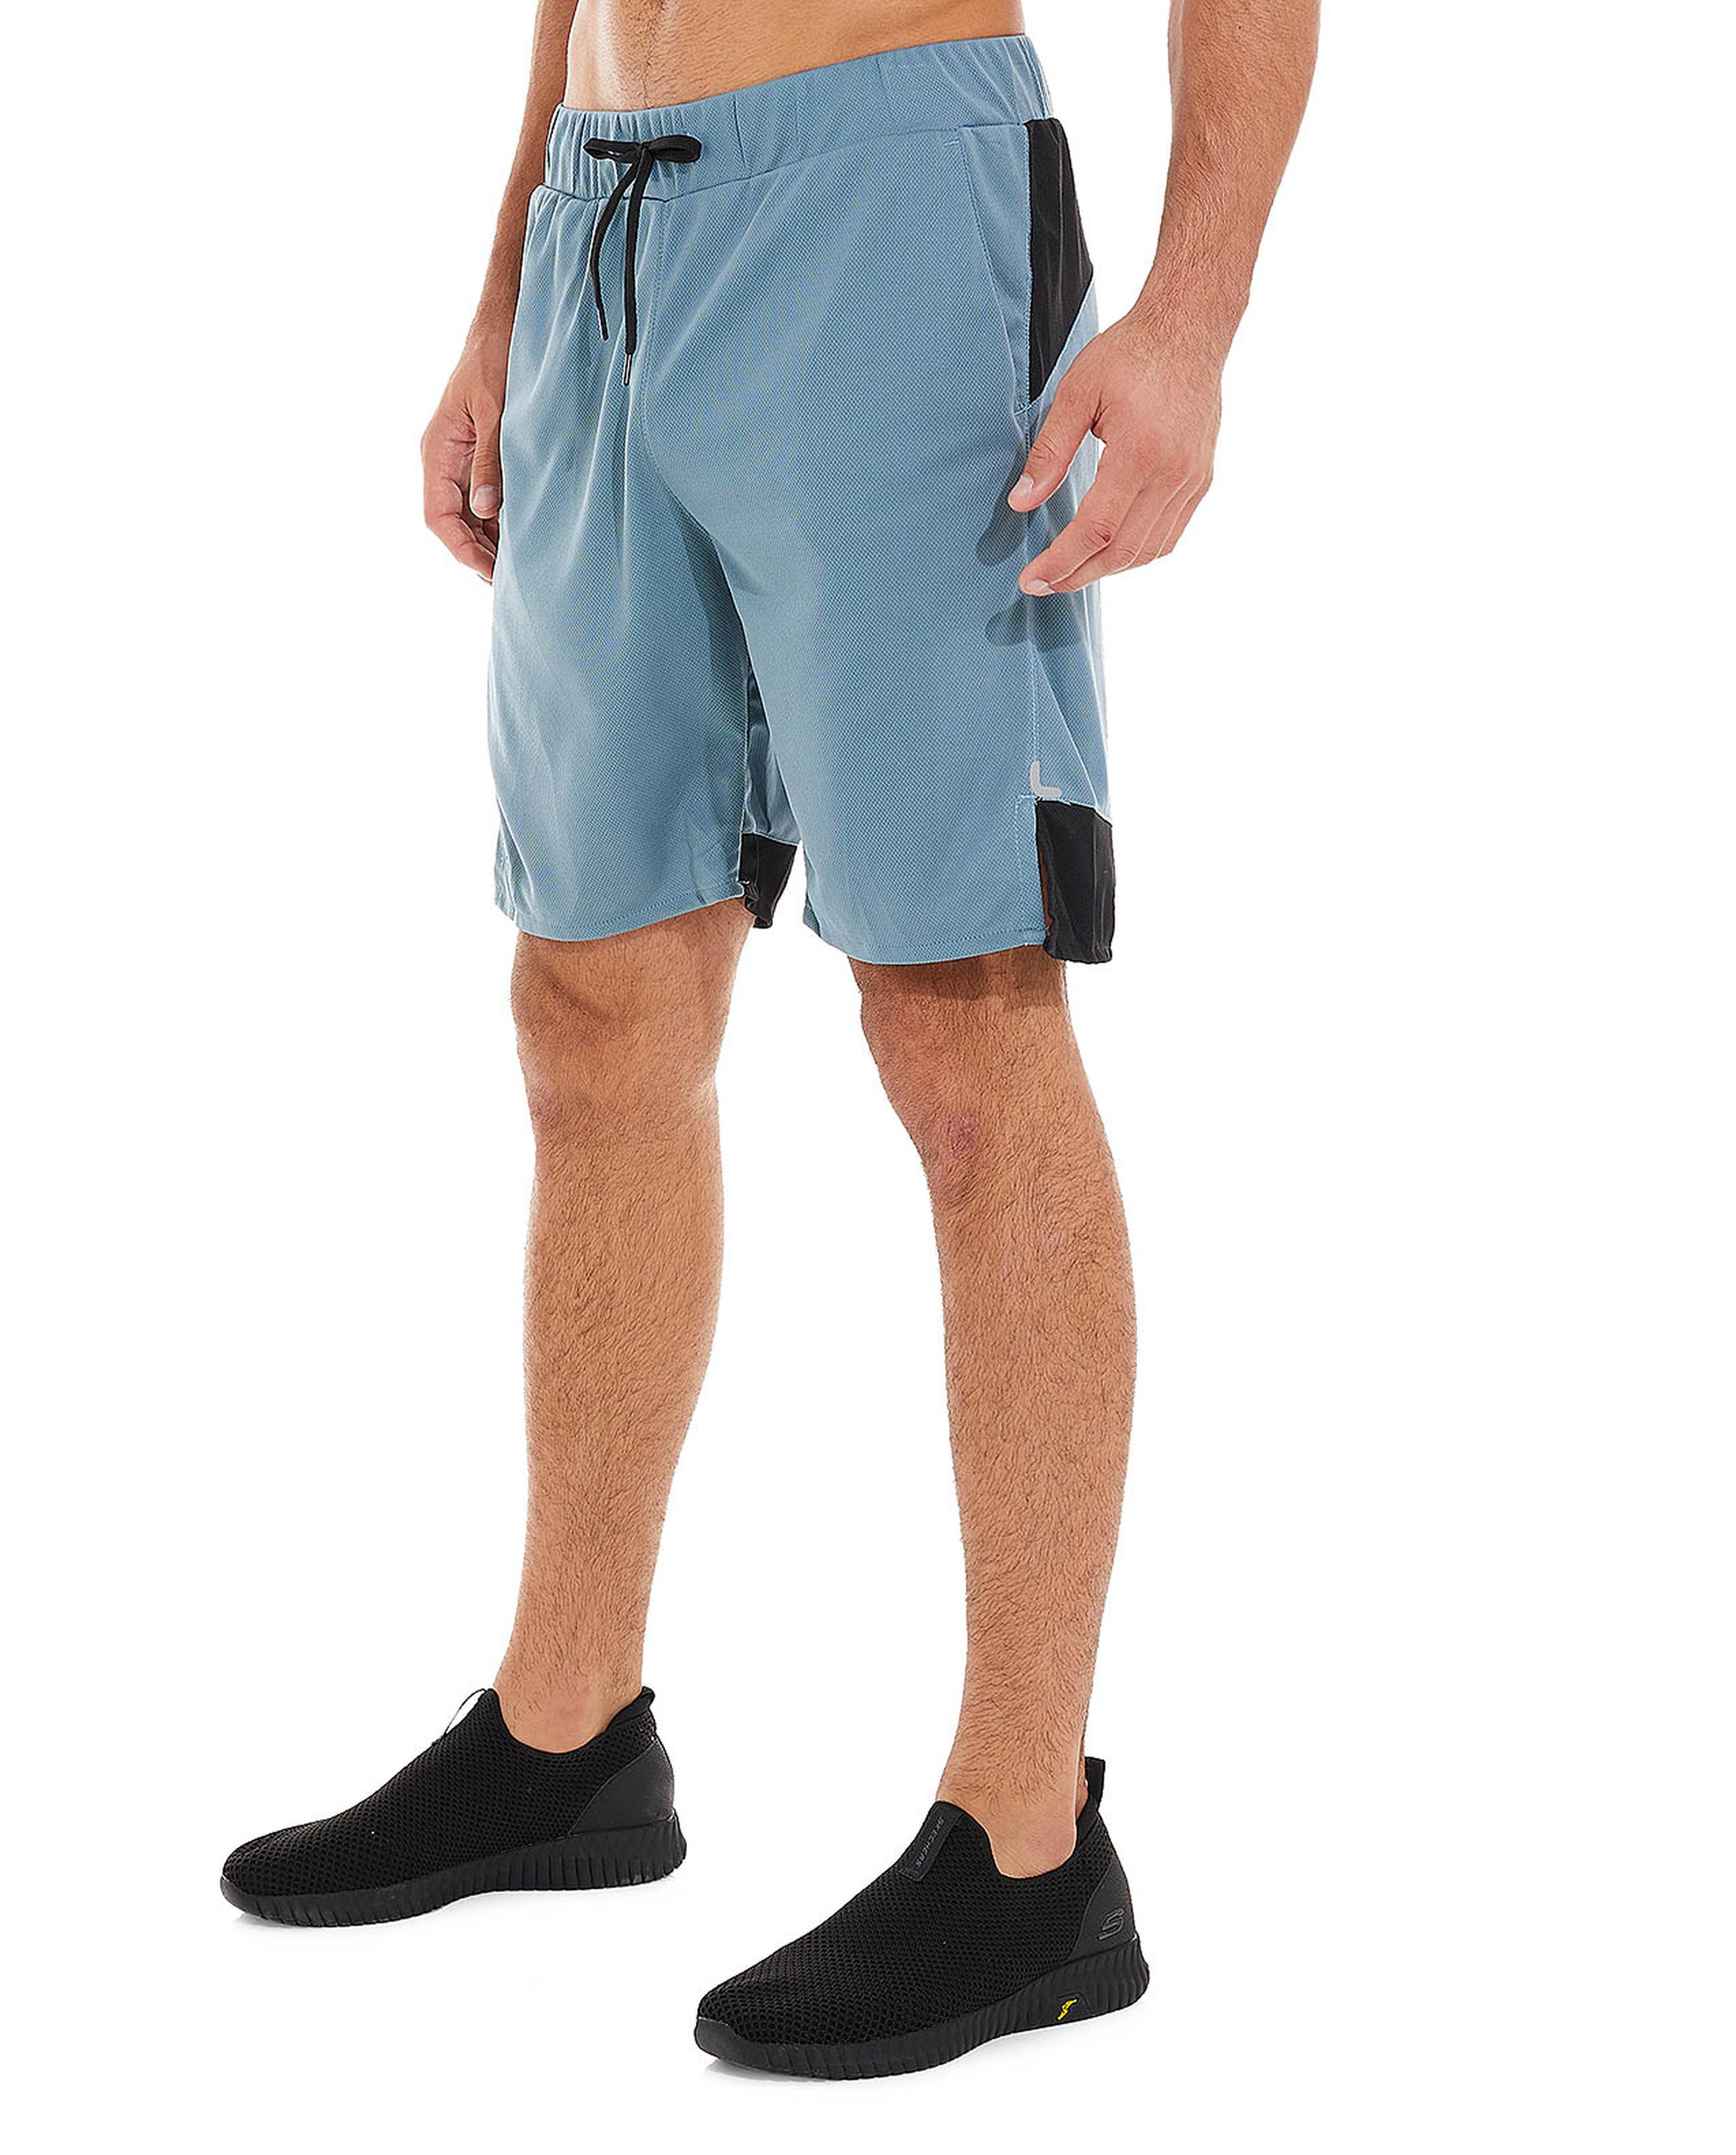 Contrast Detailed Active Shorts with Drawstring Waist